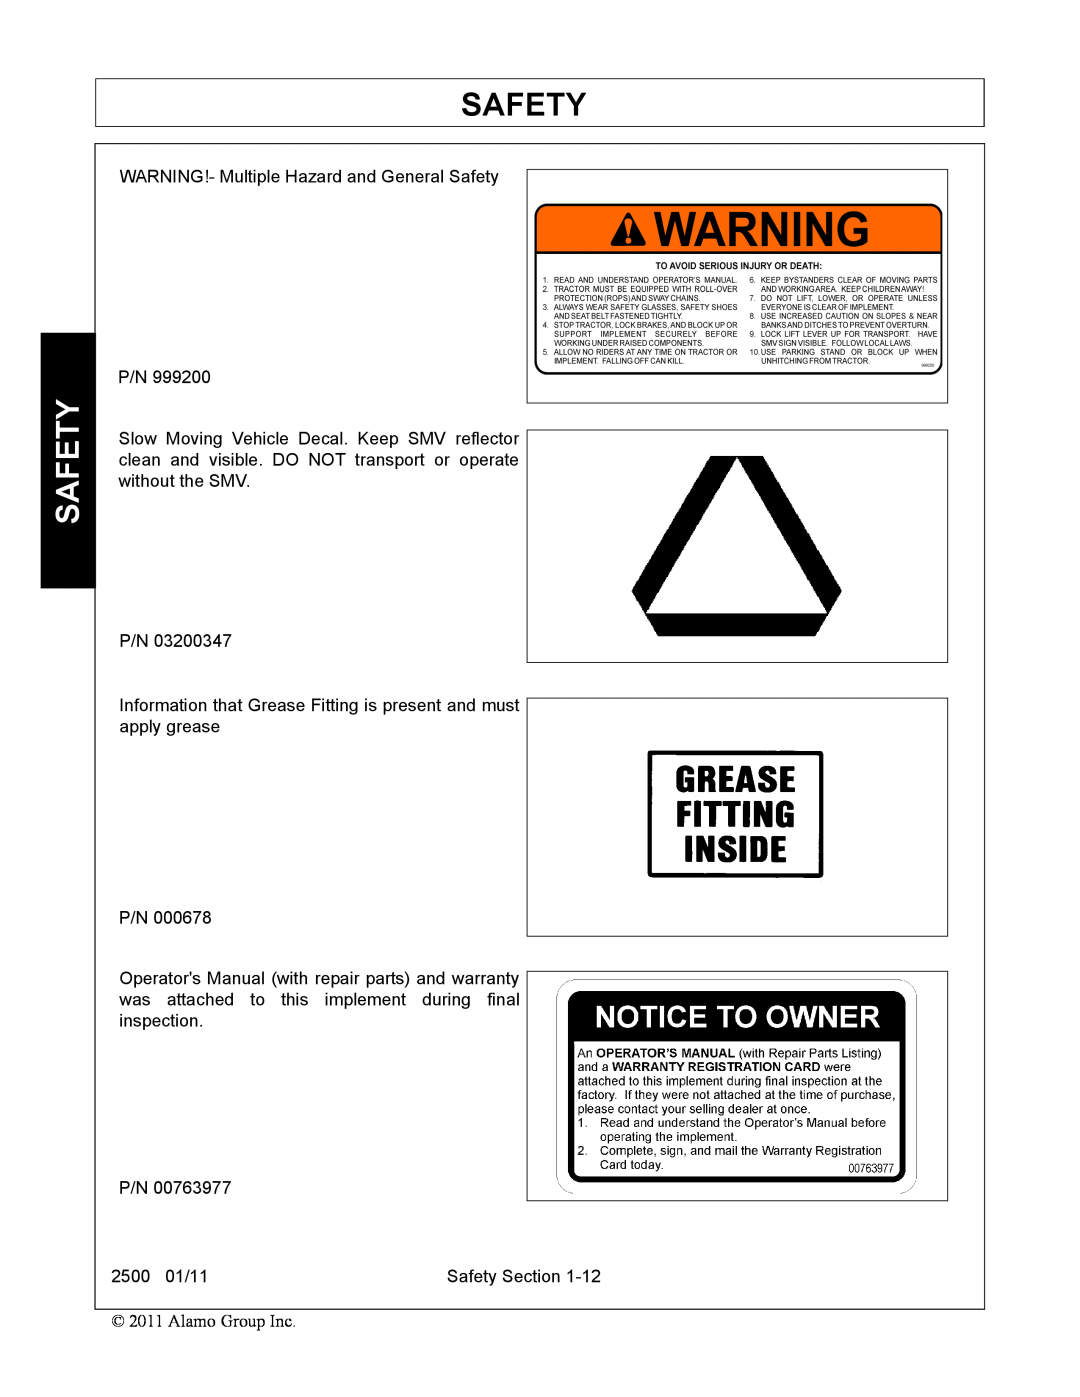 Alamo manual WARNING!- Multiple Hazard and General Safety P/N, 2500 01/11, Safety Section 